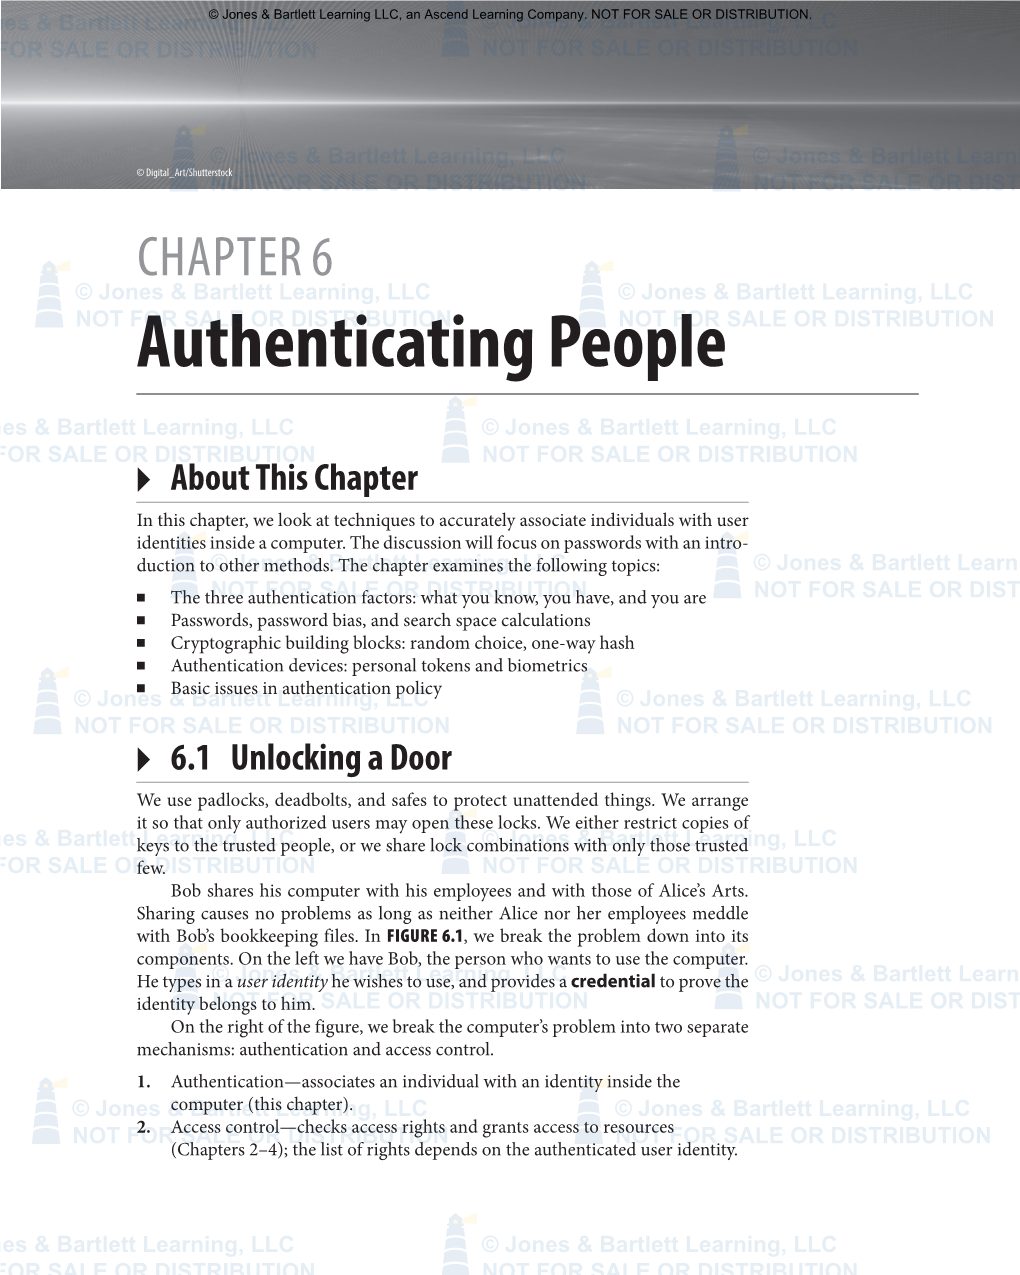 Authenticating People